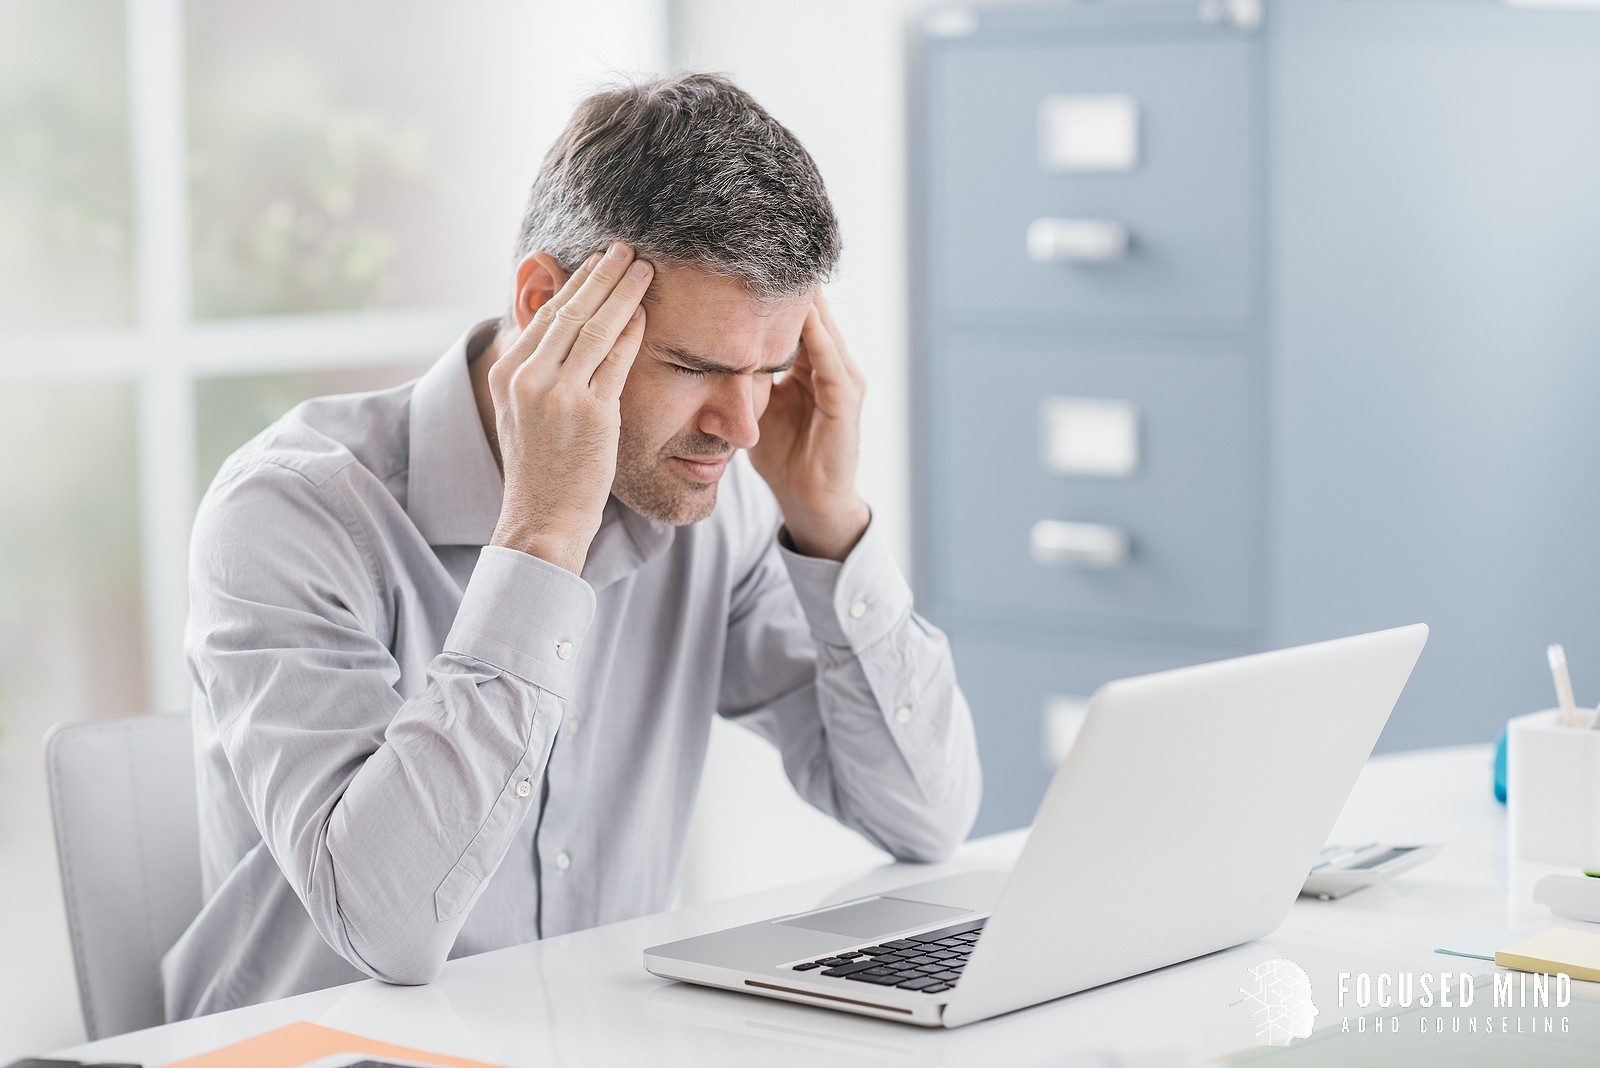 A man massages his temples as he looks at his computer screen. This represents the pain of ADHD thought loops. Learn more about ADHD symptoms and how ADHD and overthinking are linked. Focused Mind ADHD Counseling can offer support with anxiety therapy in Columbus, OH and more. 43017 | 43016 | 43214